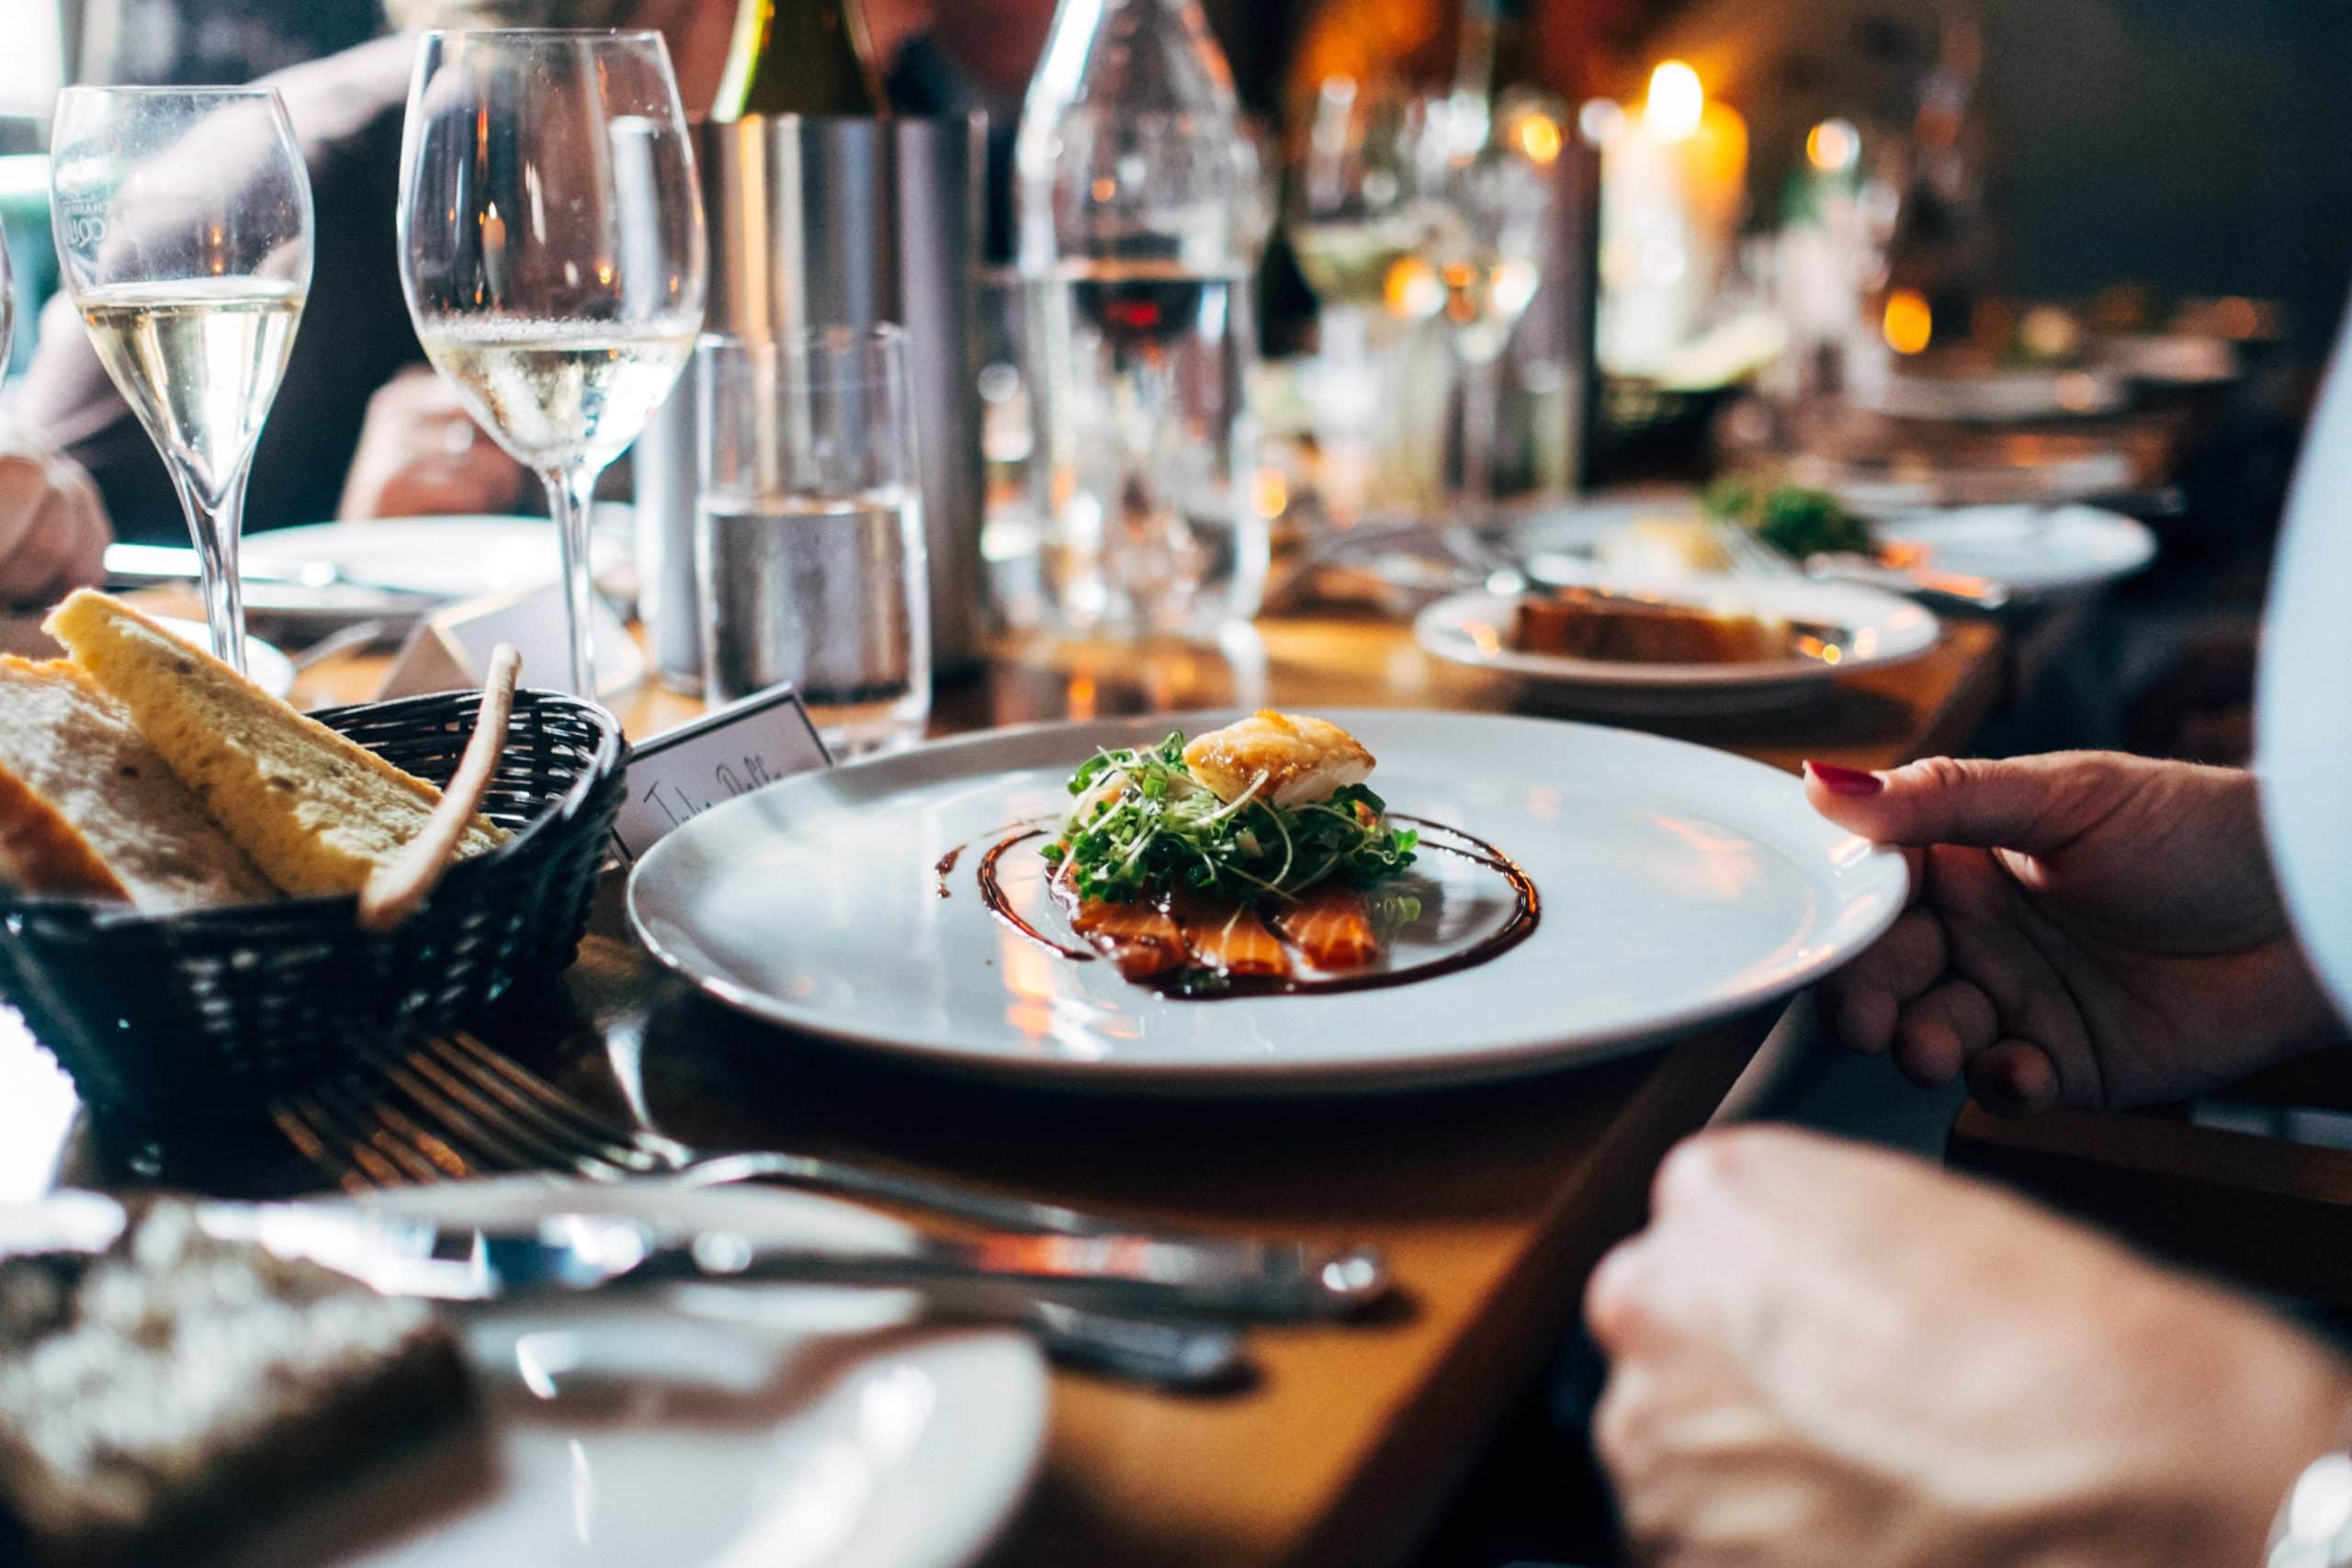 Inflation has the middle class already planning restaurant cutbacks, study finds 1